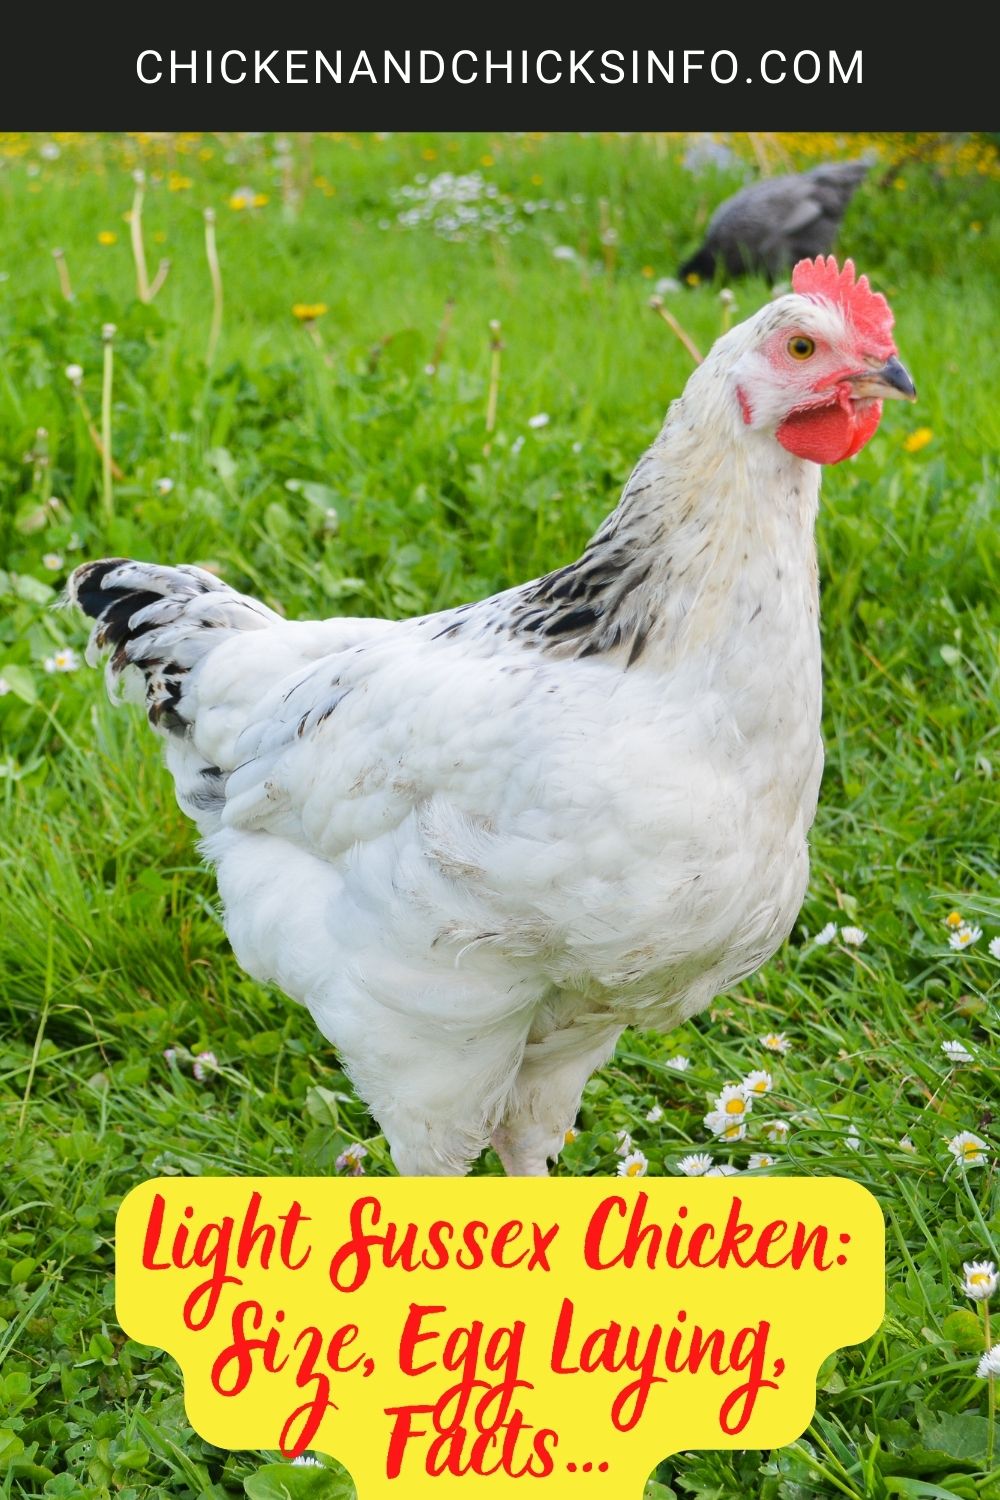 Light Sussex Chicken: Size, Egg Laying, Facts… poster.
